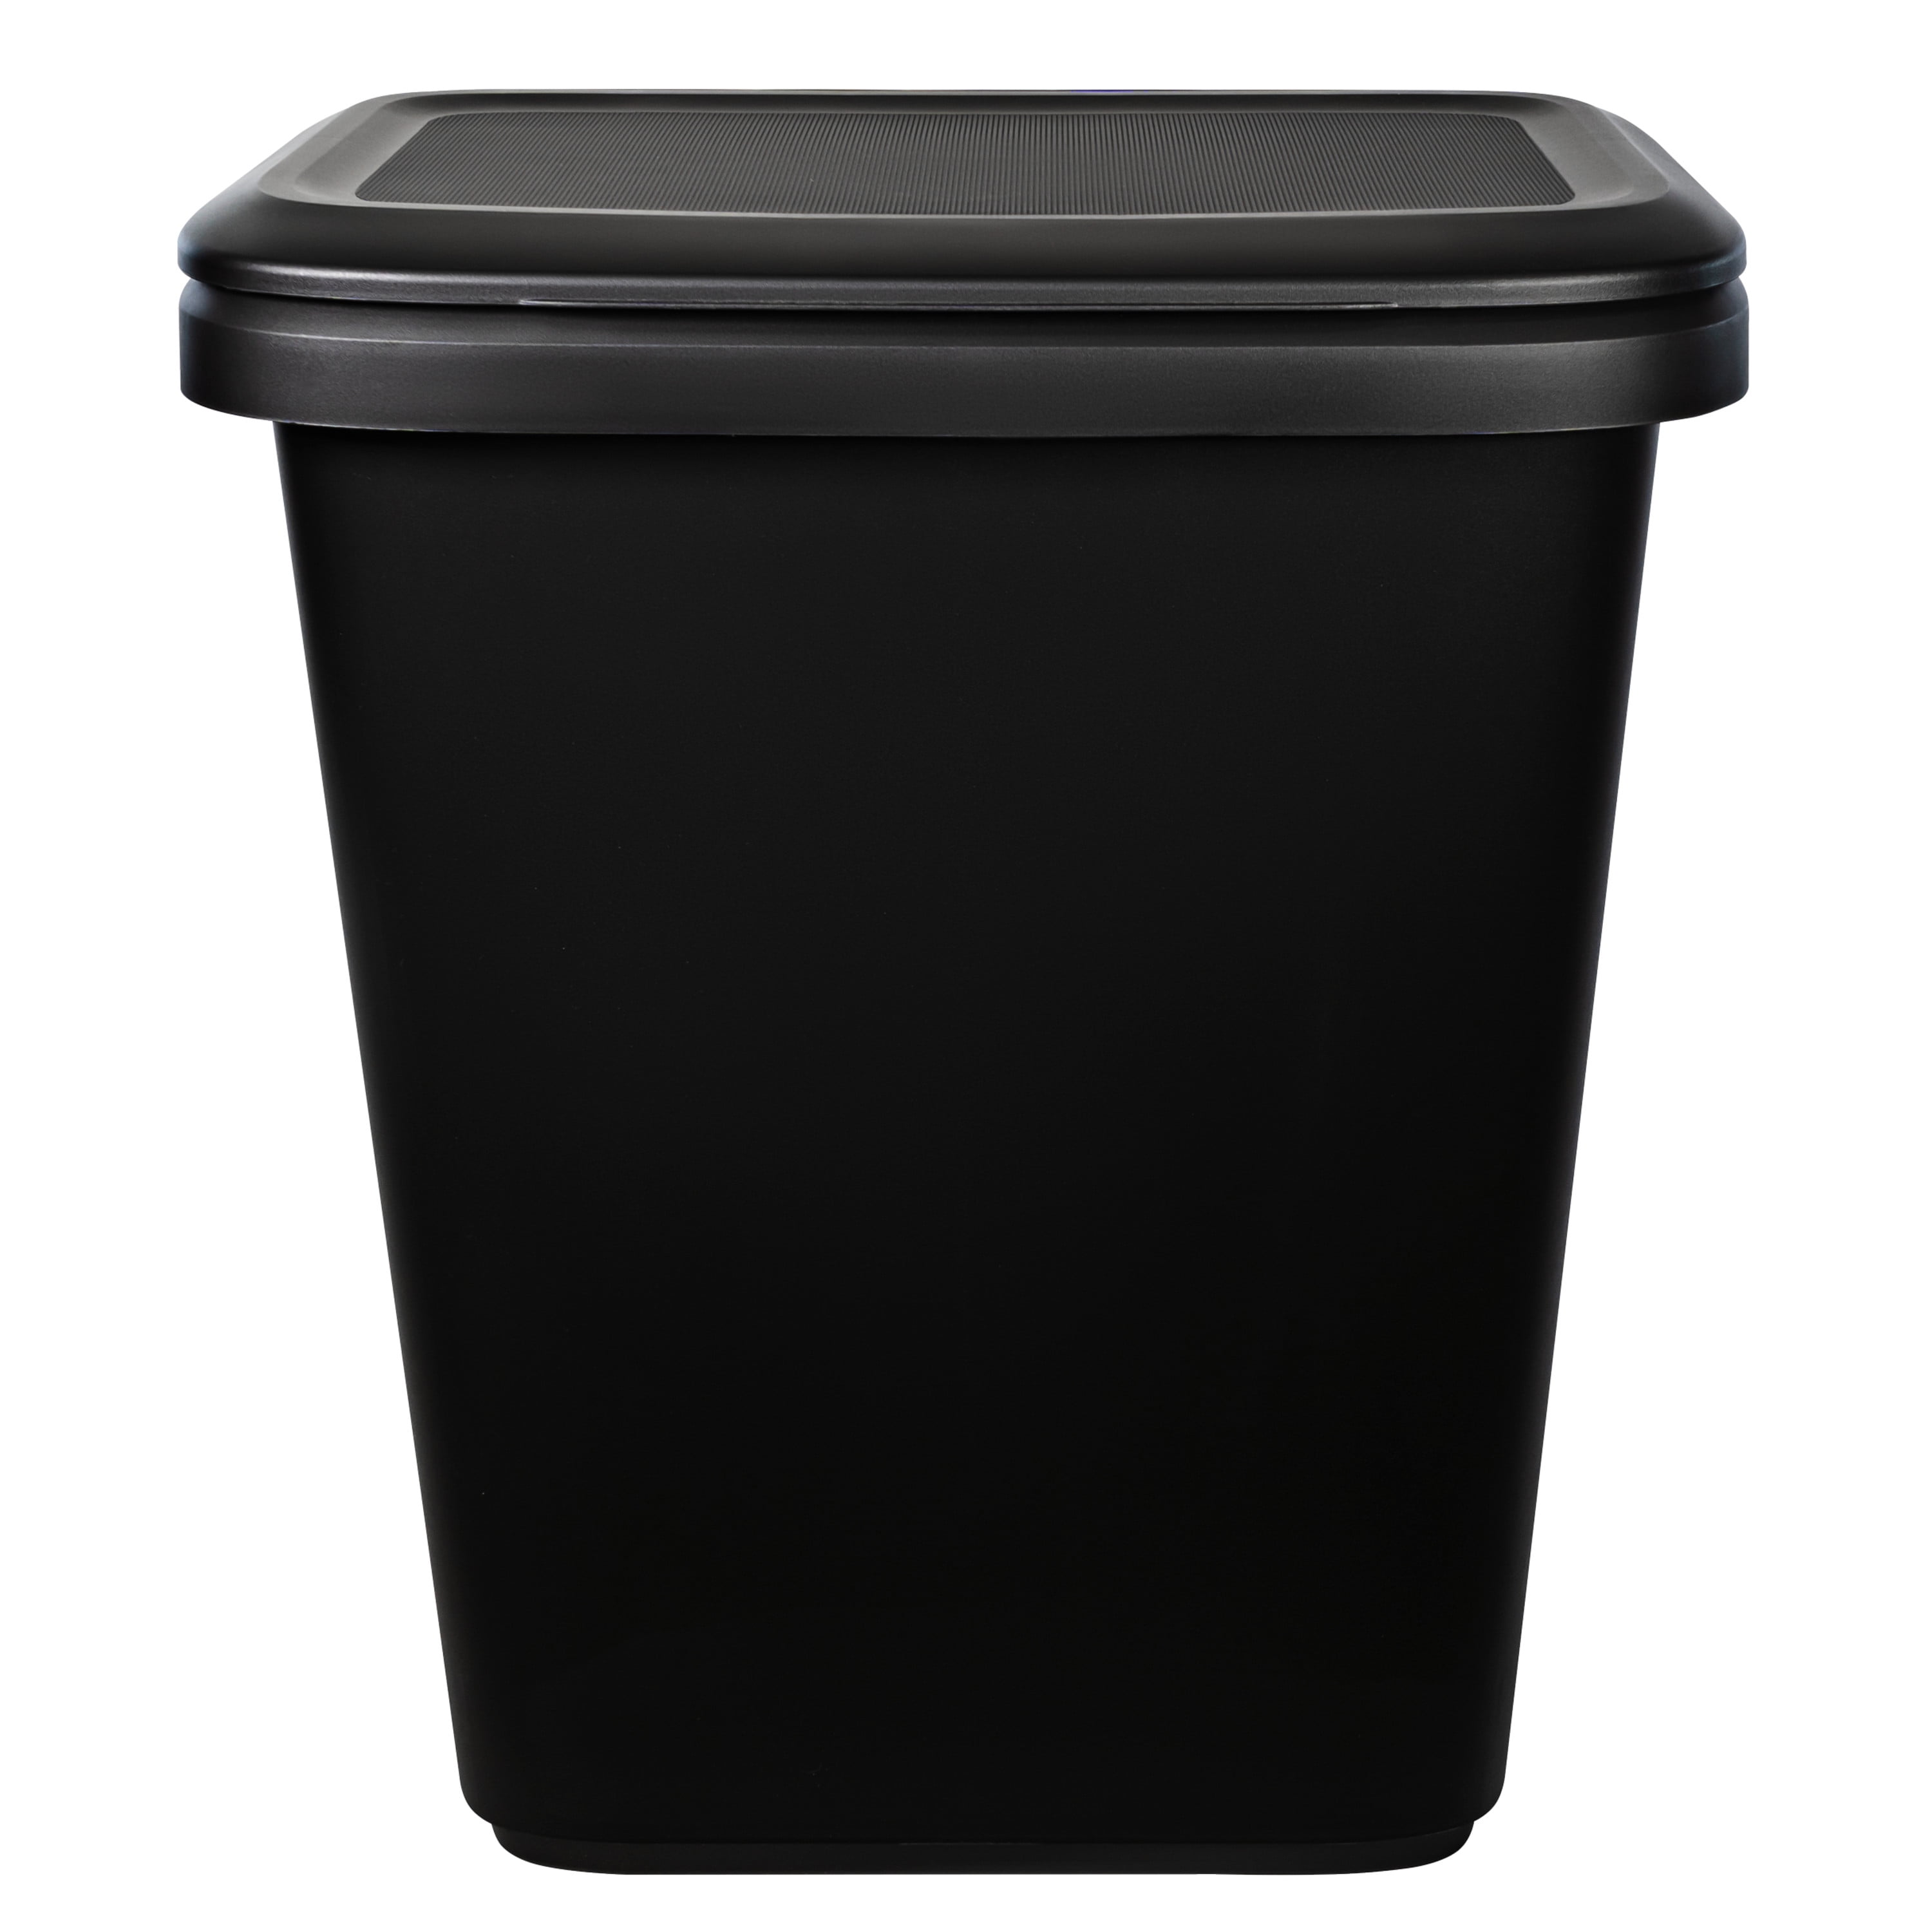 Restaurantware Clean 20 Gallon Trash Bags, 200 Standard-Duty Garbage Can Liners - Fits 20-30 Gallon Trash Cans, Stretchable, Black Plastic Bin